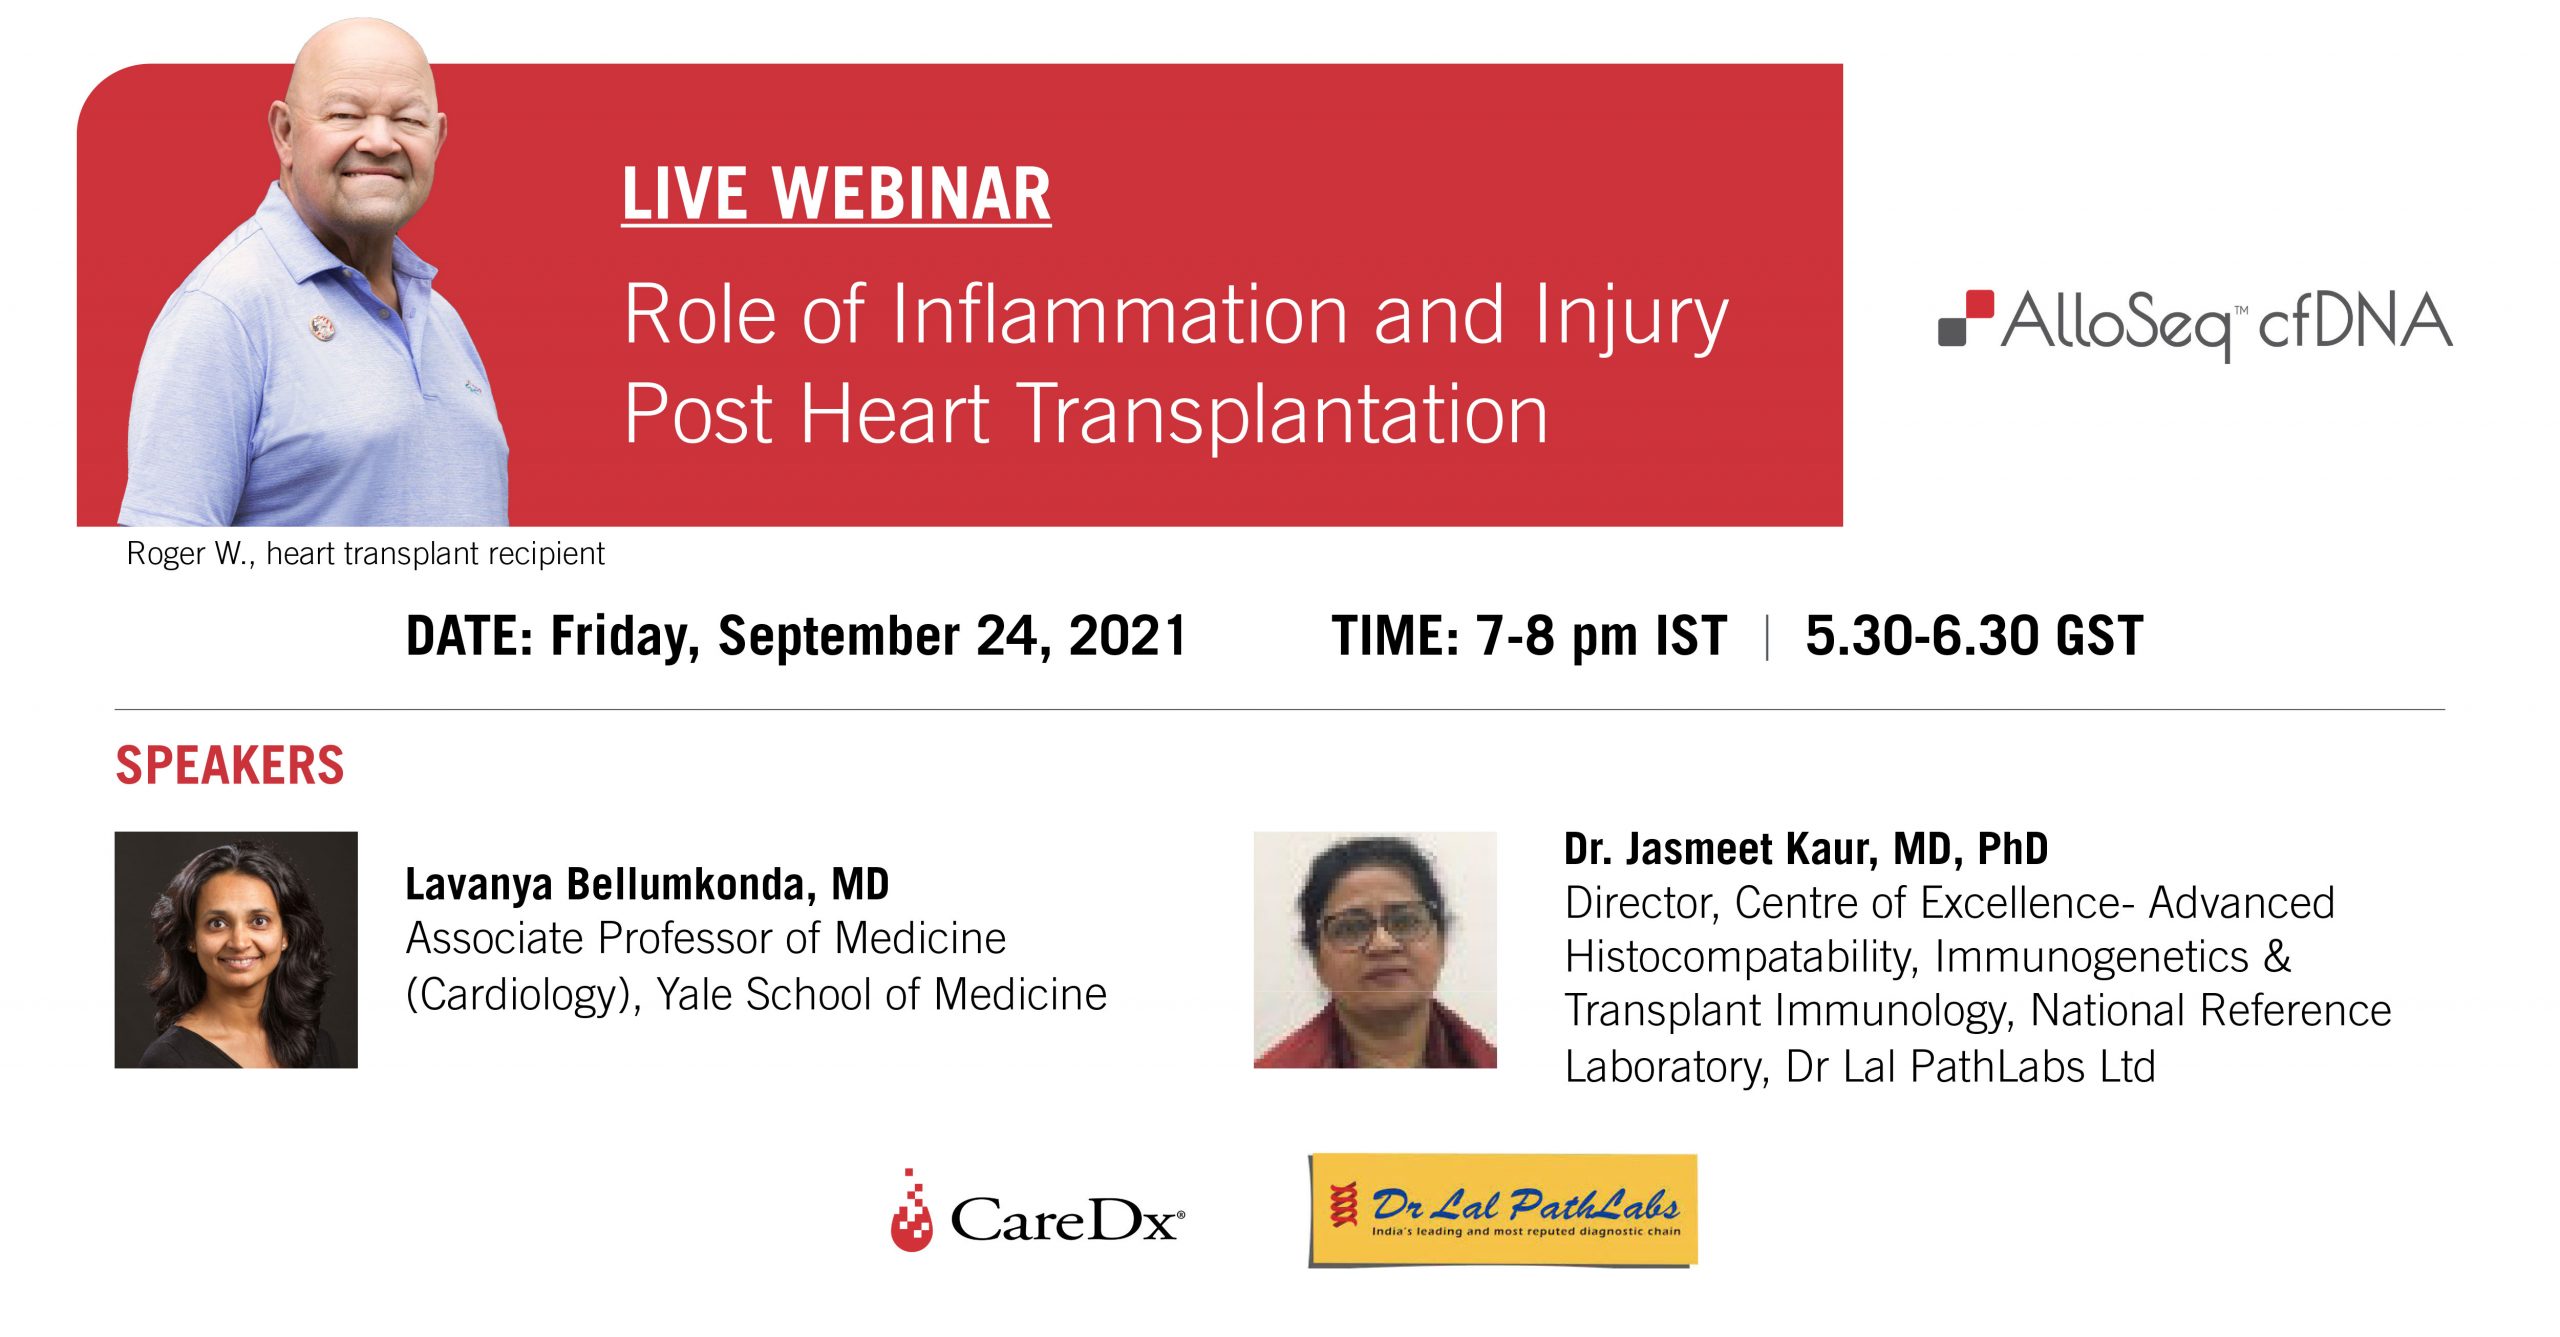 Role of Inflammation and Injury Post Heart Transplantation